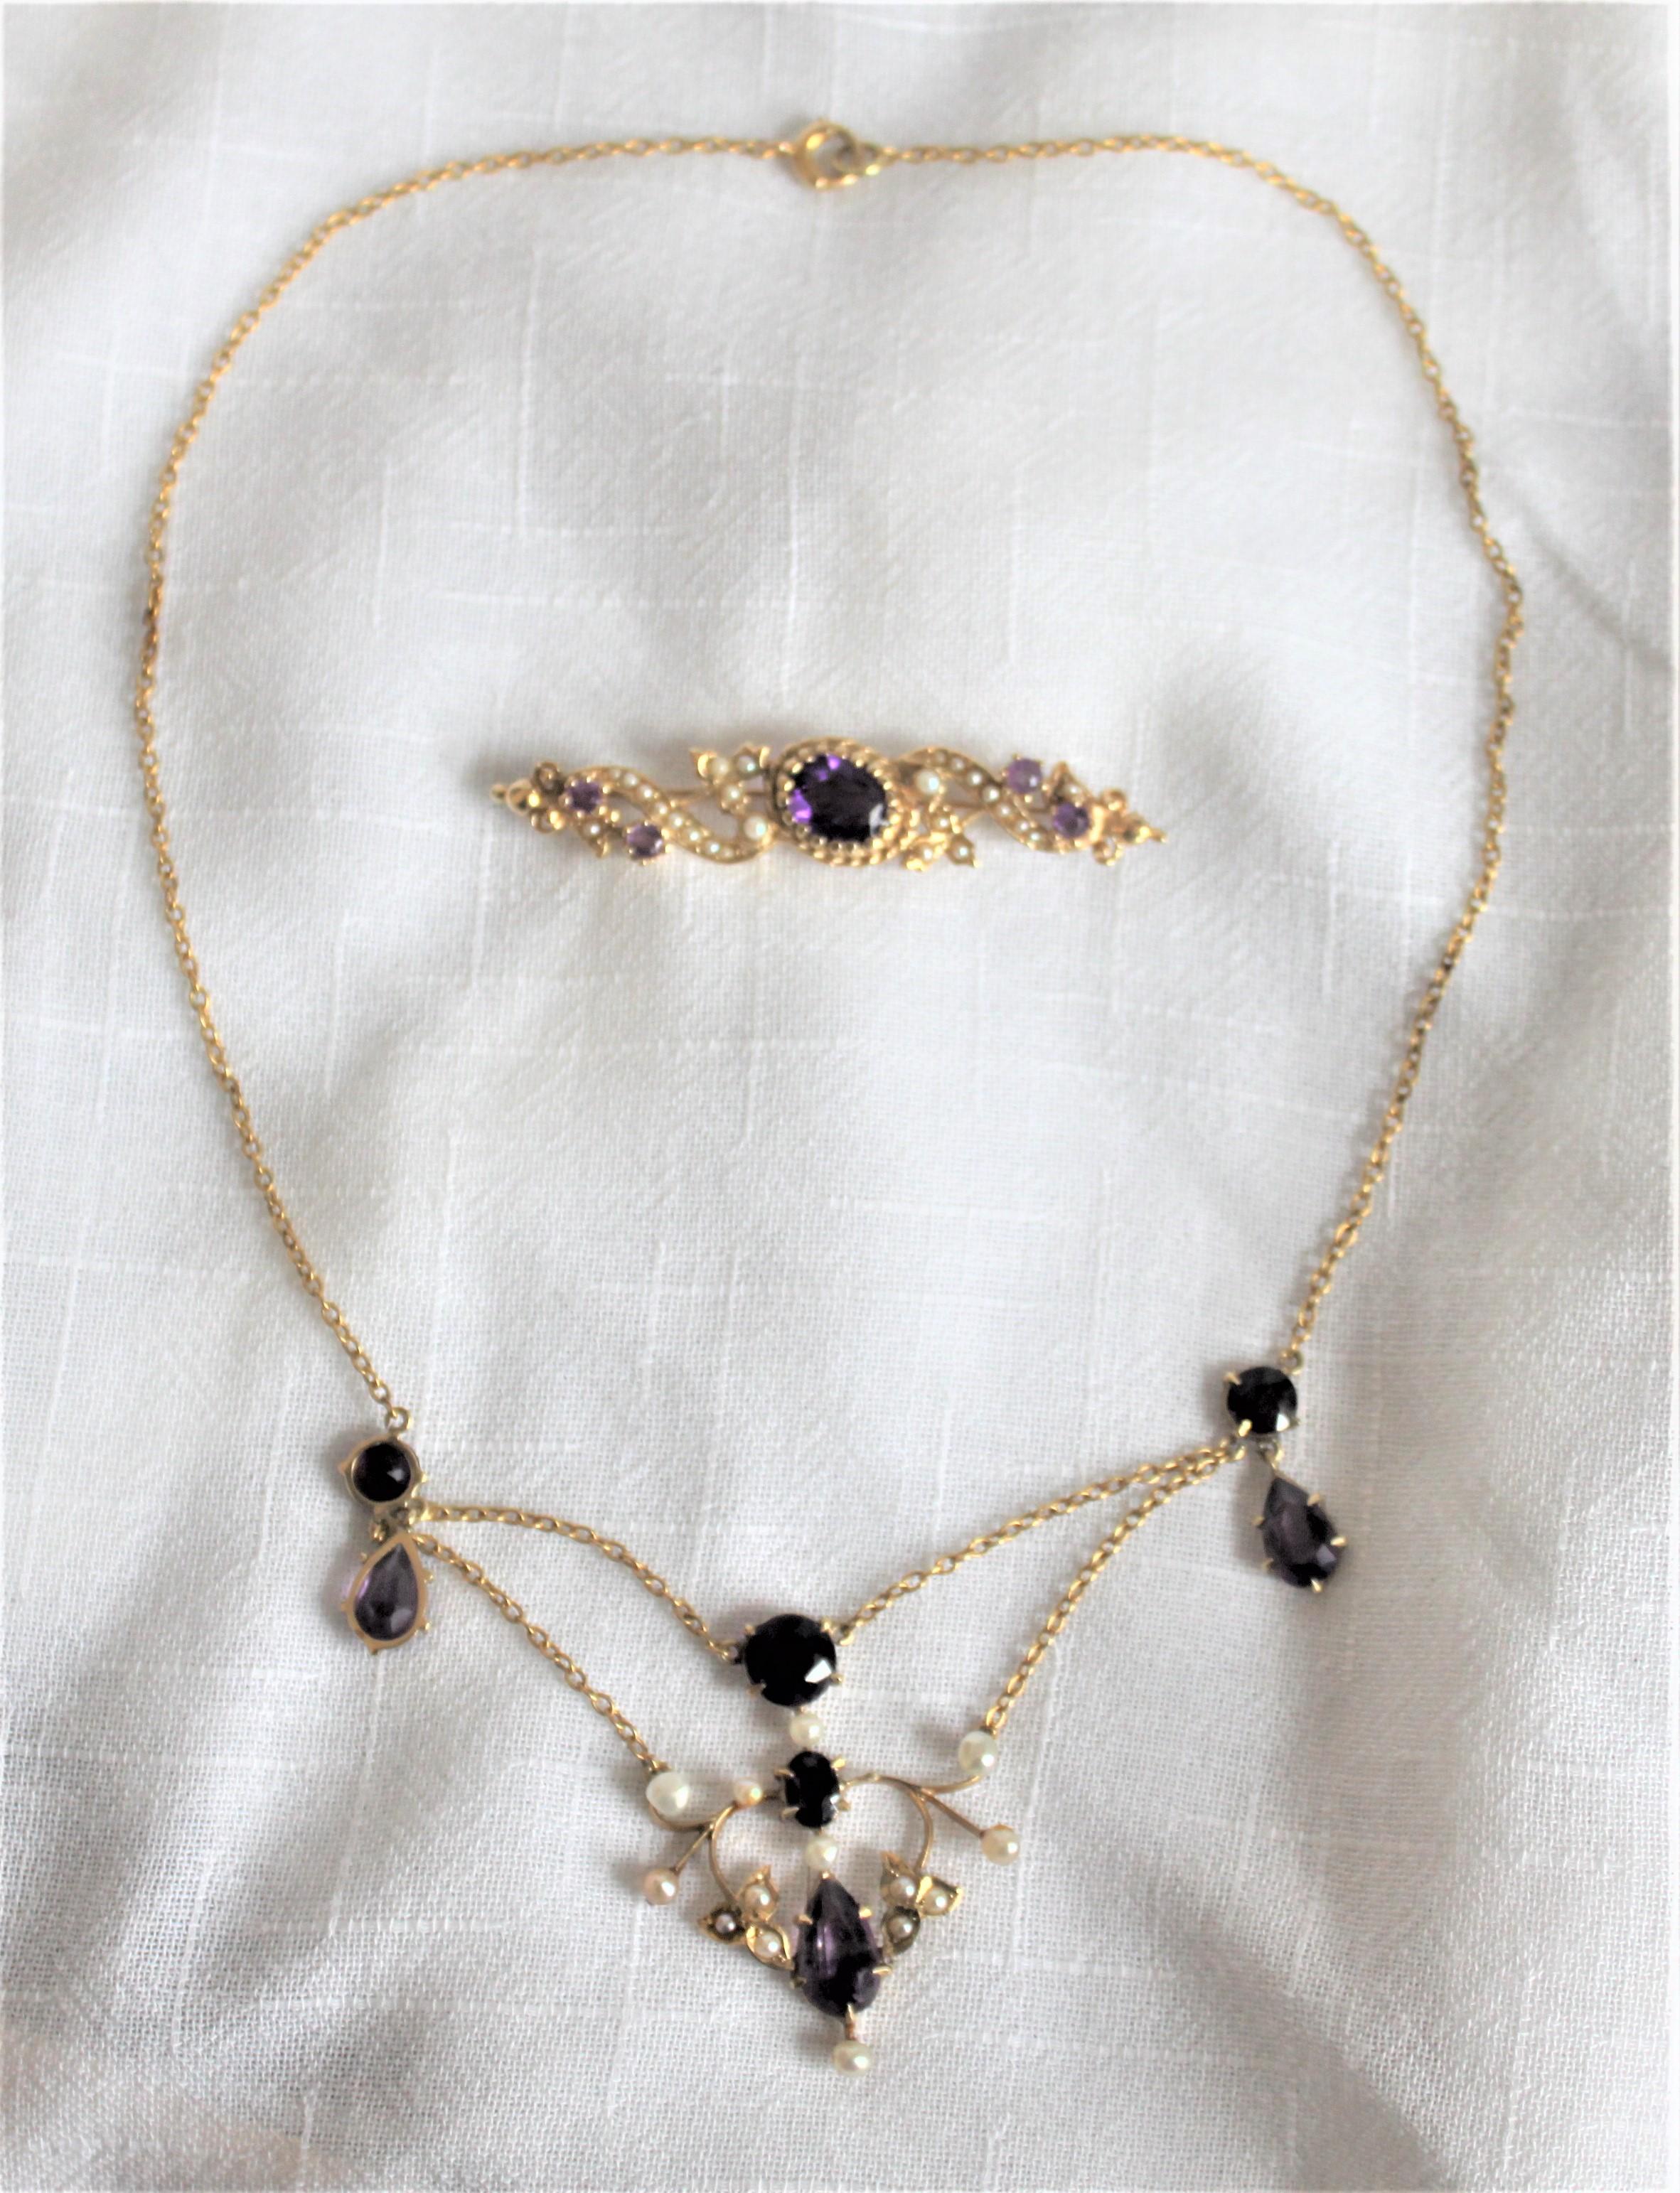 This antique pairing of a yellow 14-karat gold necklace and brooch are presumed to have been made in the United States in circa 1910 in the period Edwardian style. Both pieces are composed of 14-karat yellow gold, amethyst prong set stones and